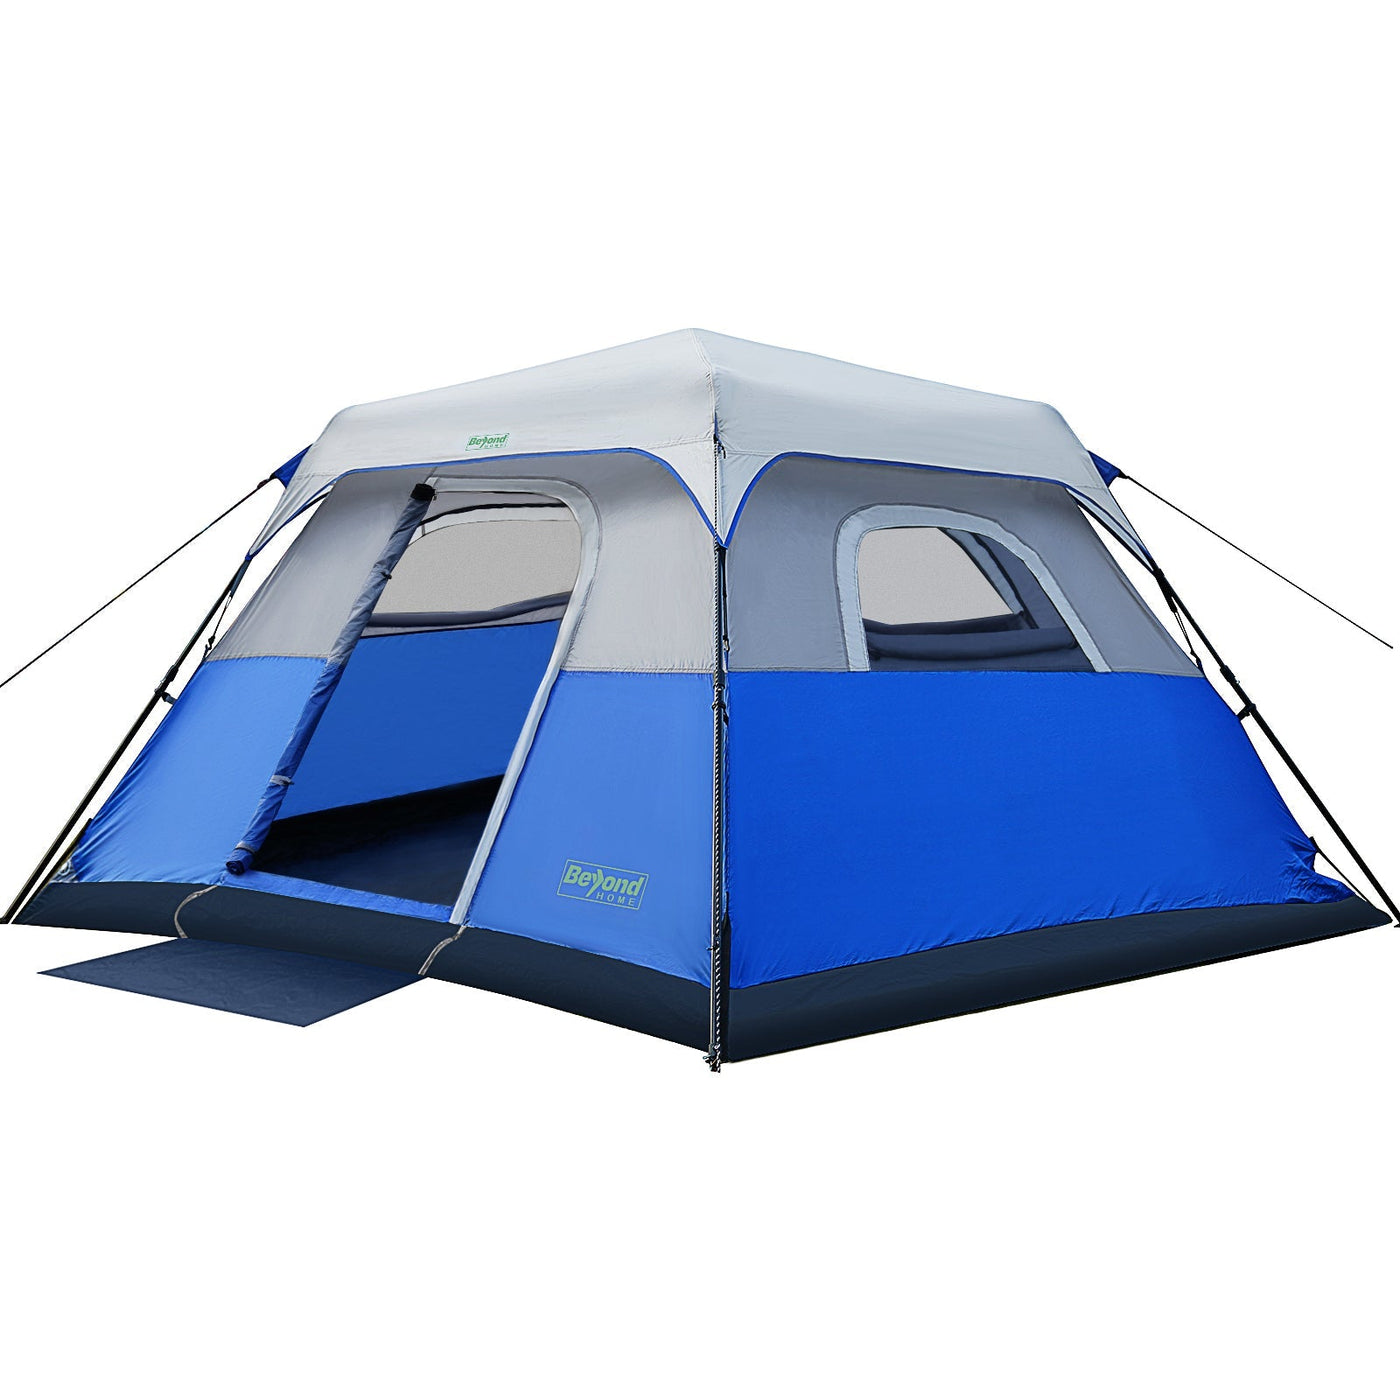 BeyondHOME Instant Cabin 6 Person Camping Tent-Navy Blue